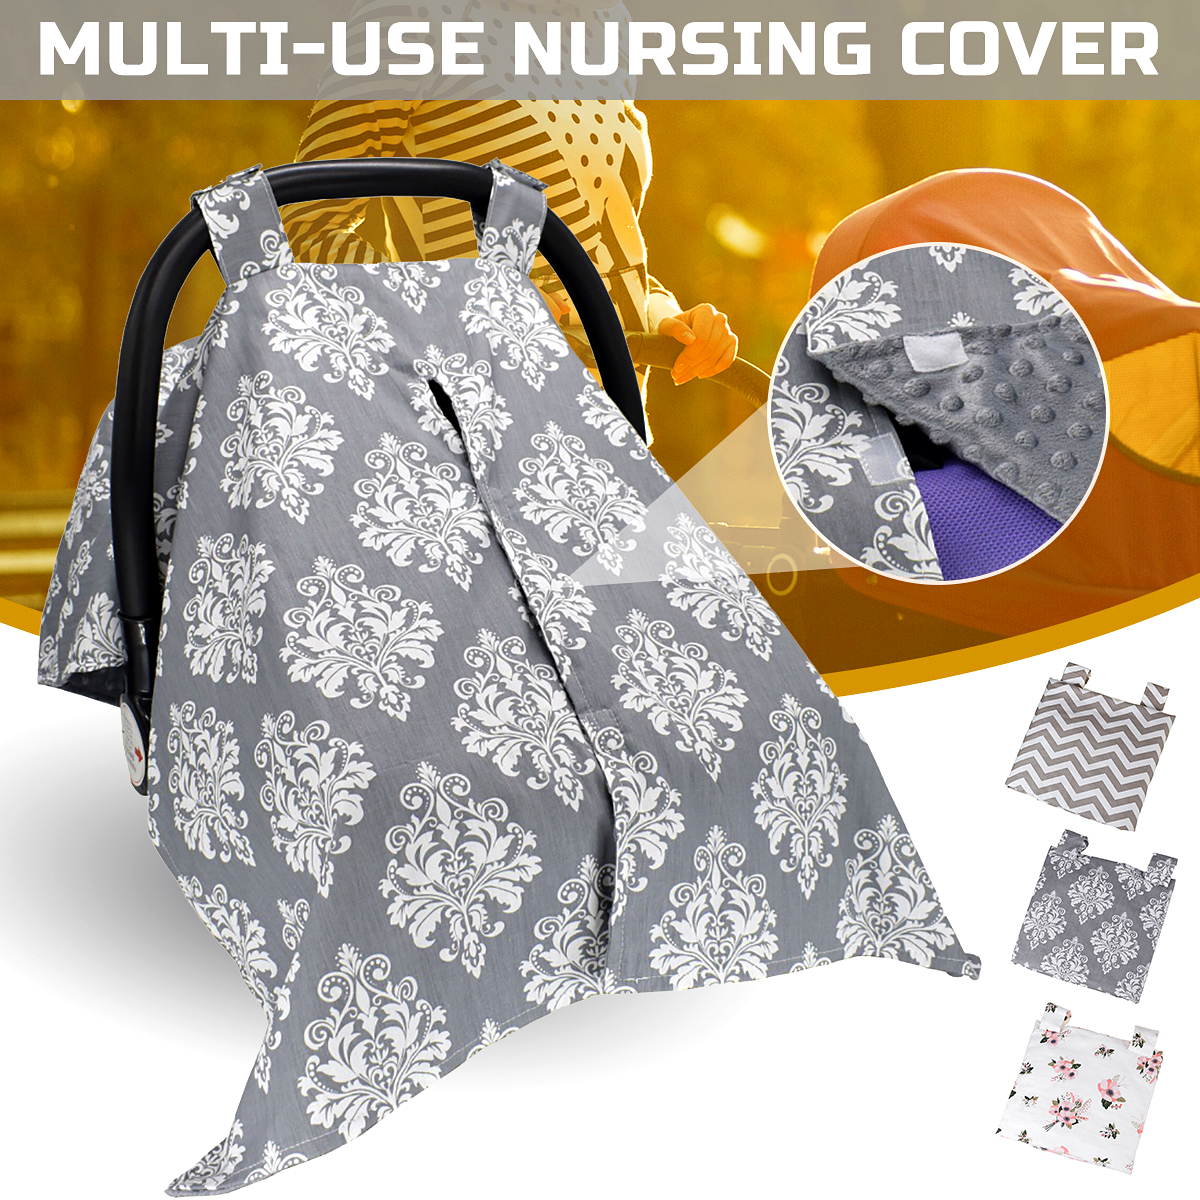 Multi-Use-Thickened-Newborn-Infant-Nursing-Cover-Baby-Car-Seat-Canopy-Kids-Push-Cart-Protective-Cove-1810352-1